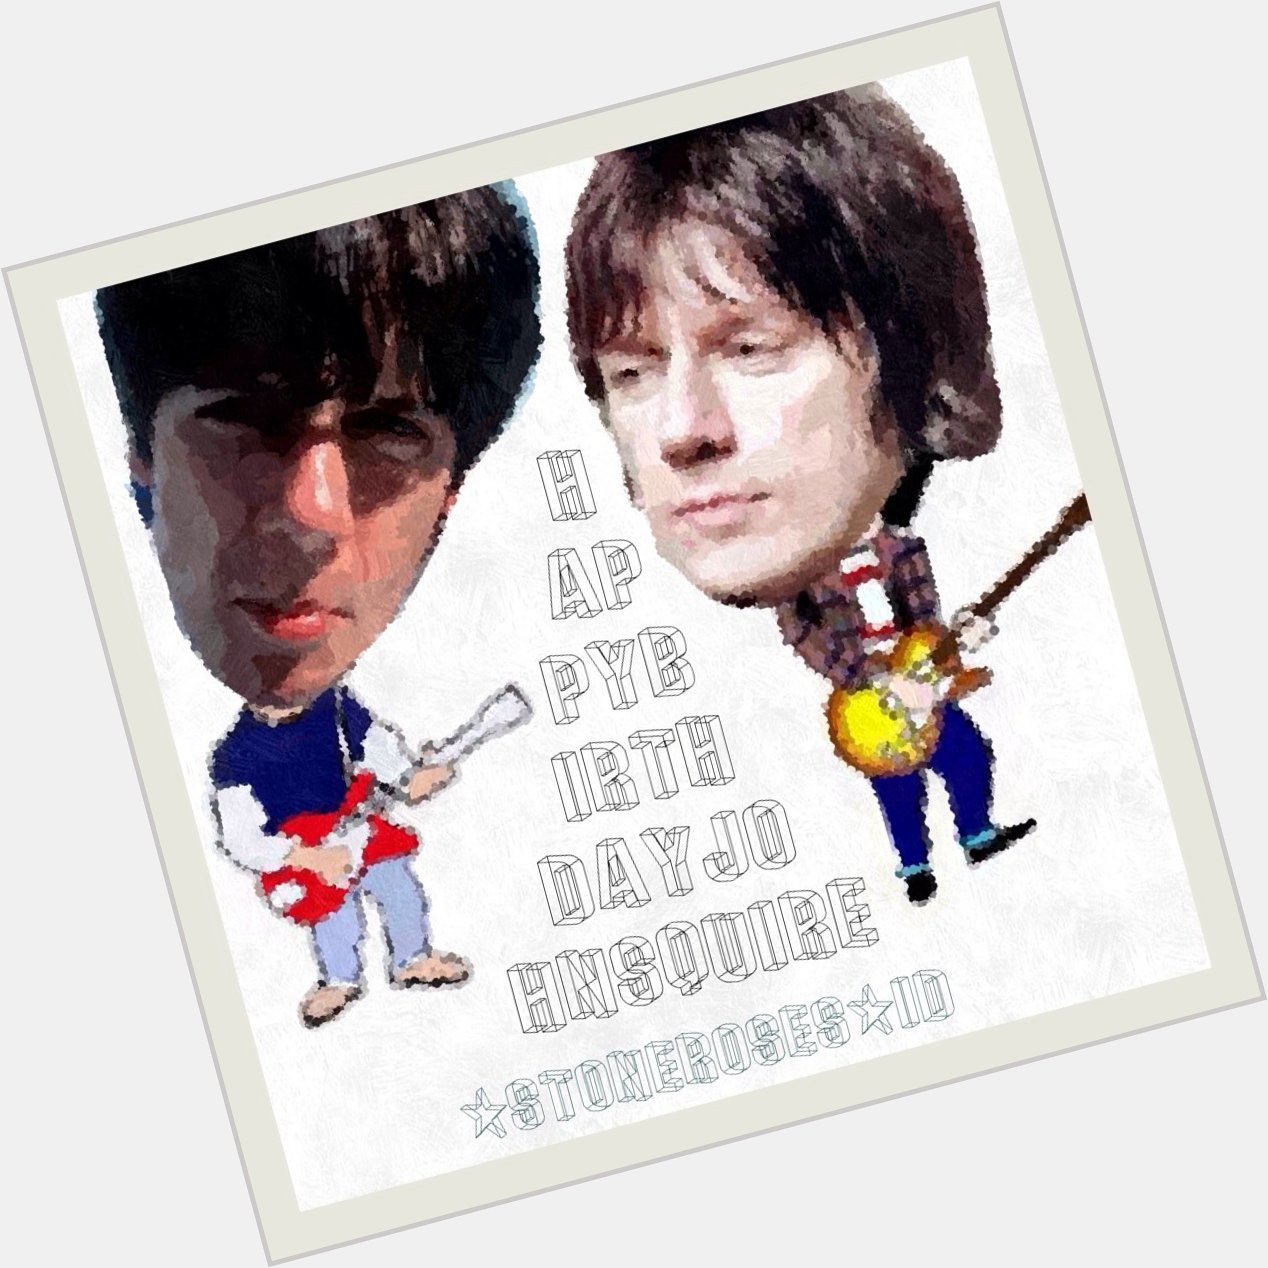 Took minty\s cool artwork & mish-mashed it into a Happy 53rd Bday John Squire card~

Long Live John Thomas Squire! 